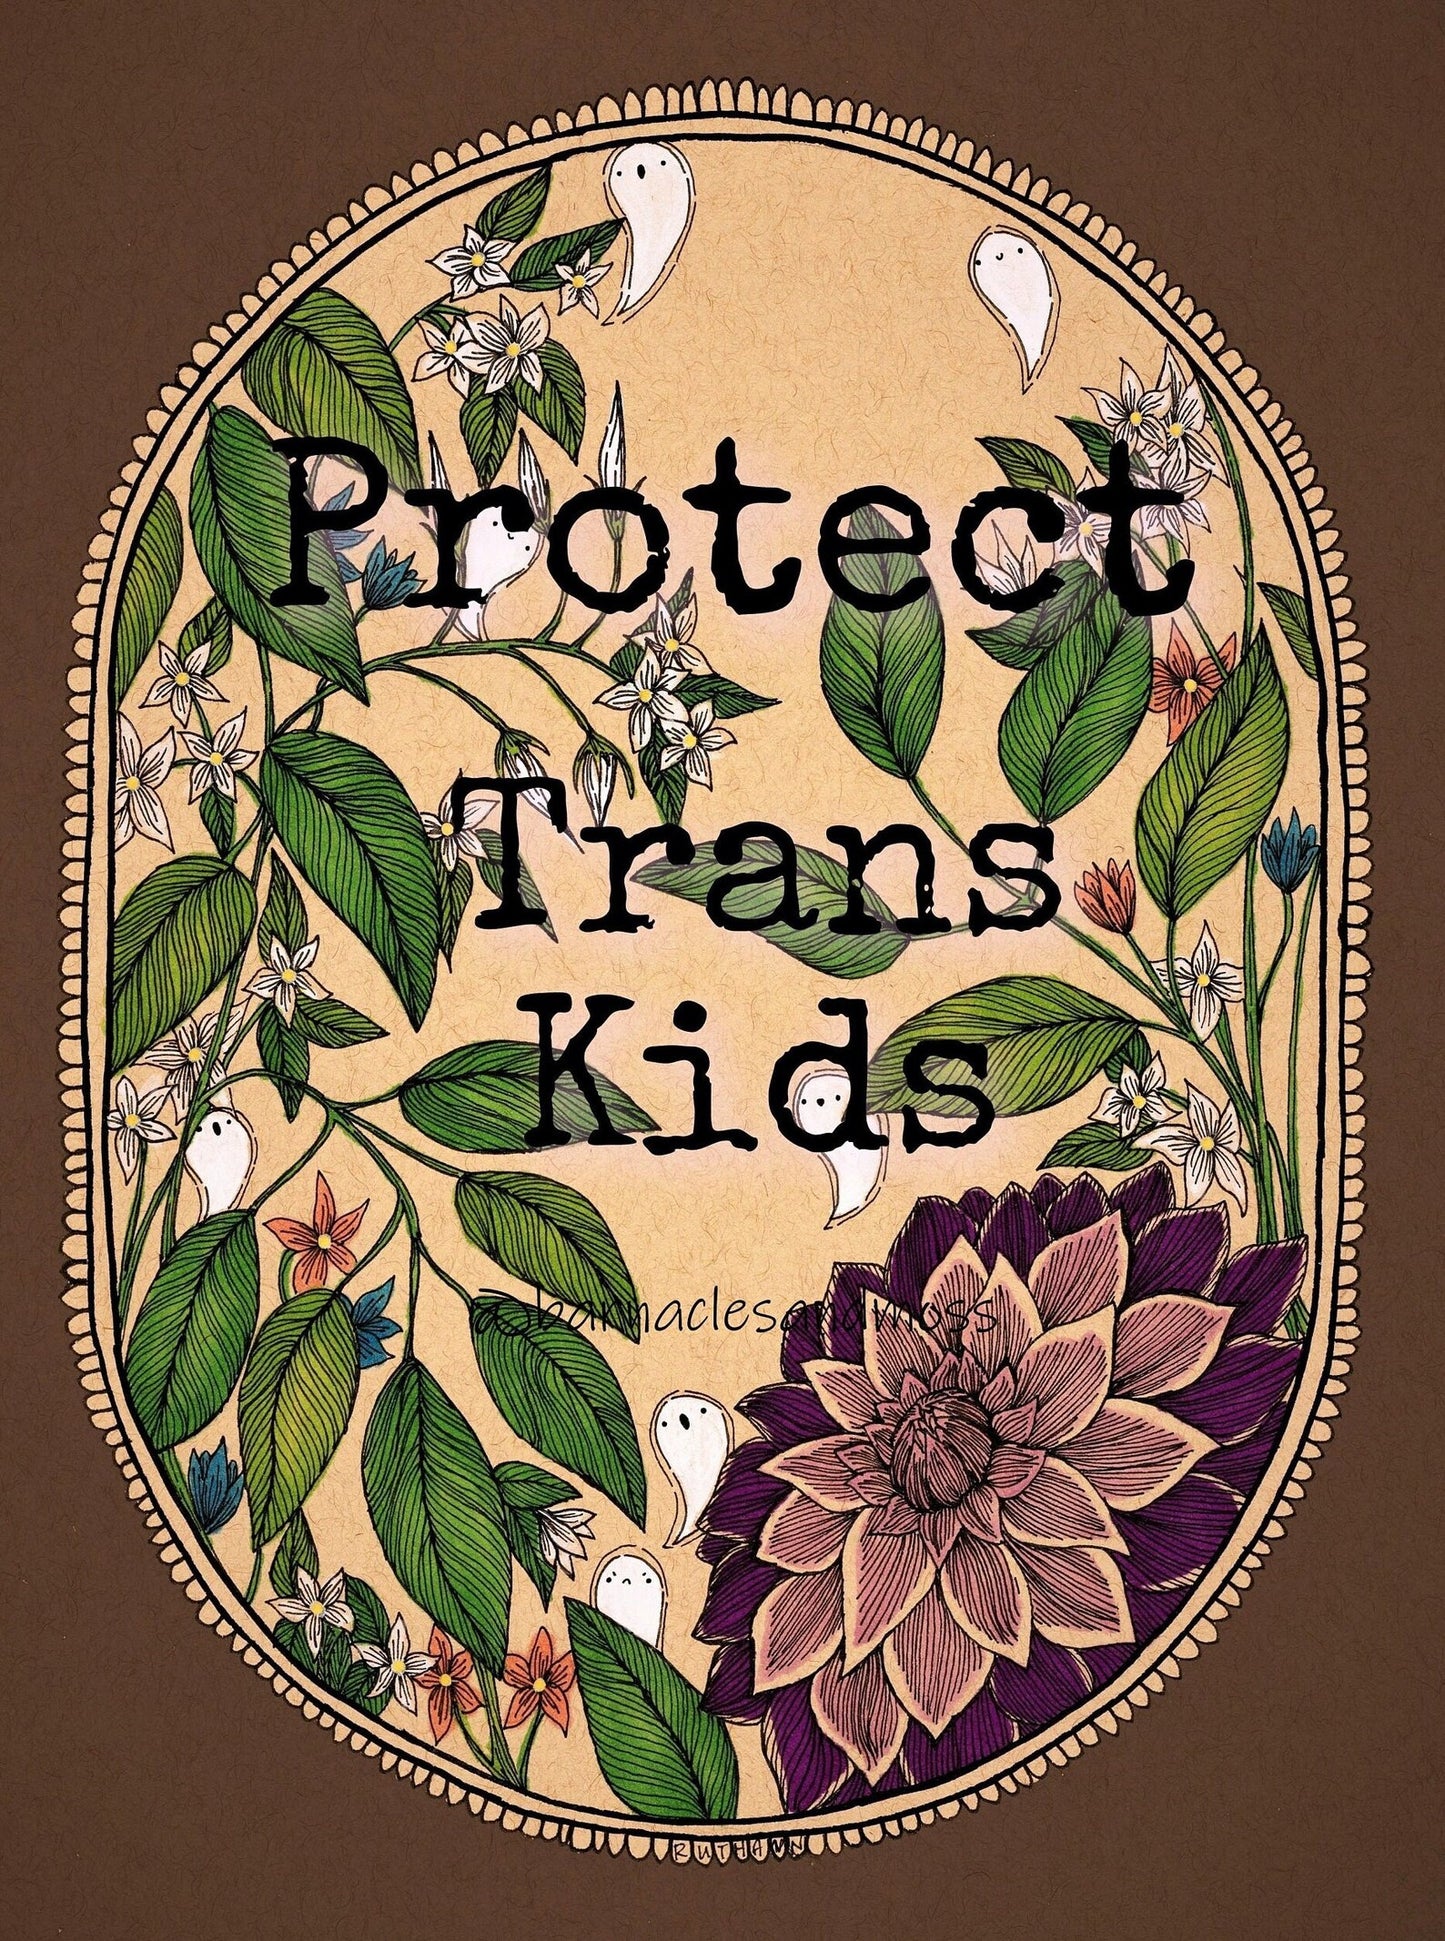 Barnacles and Moss "Protect Trans Kids"